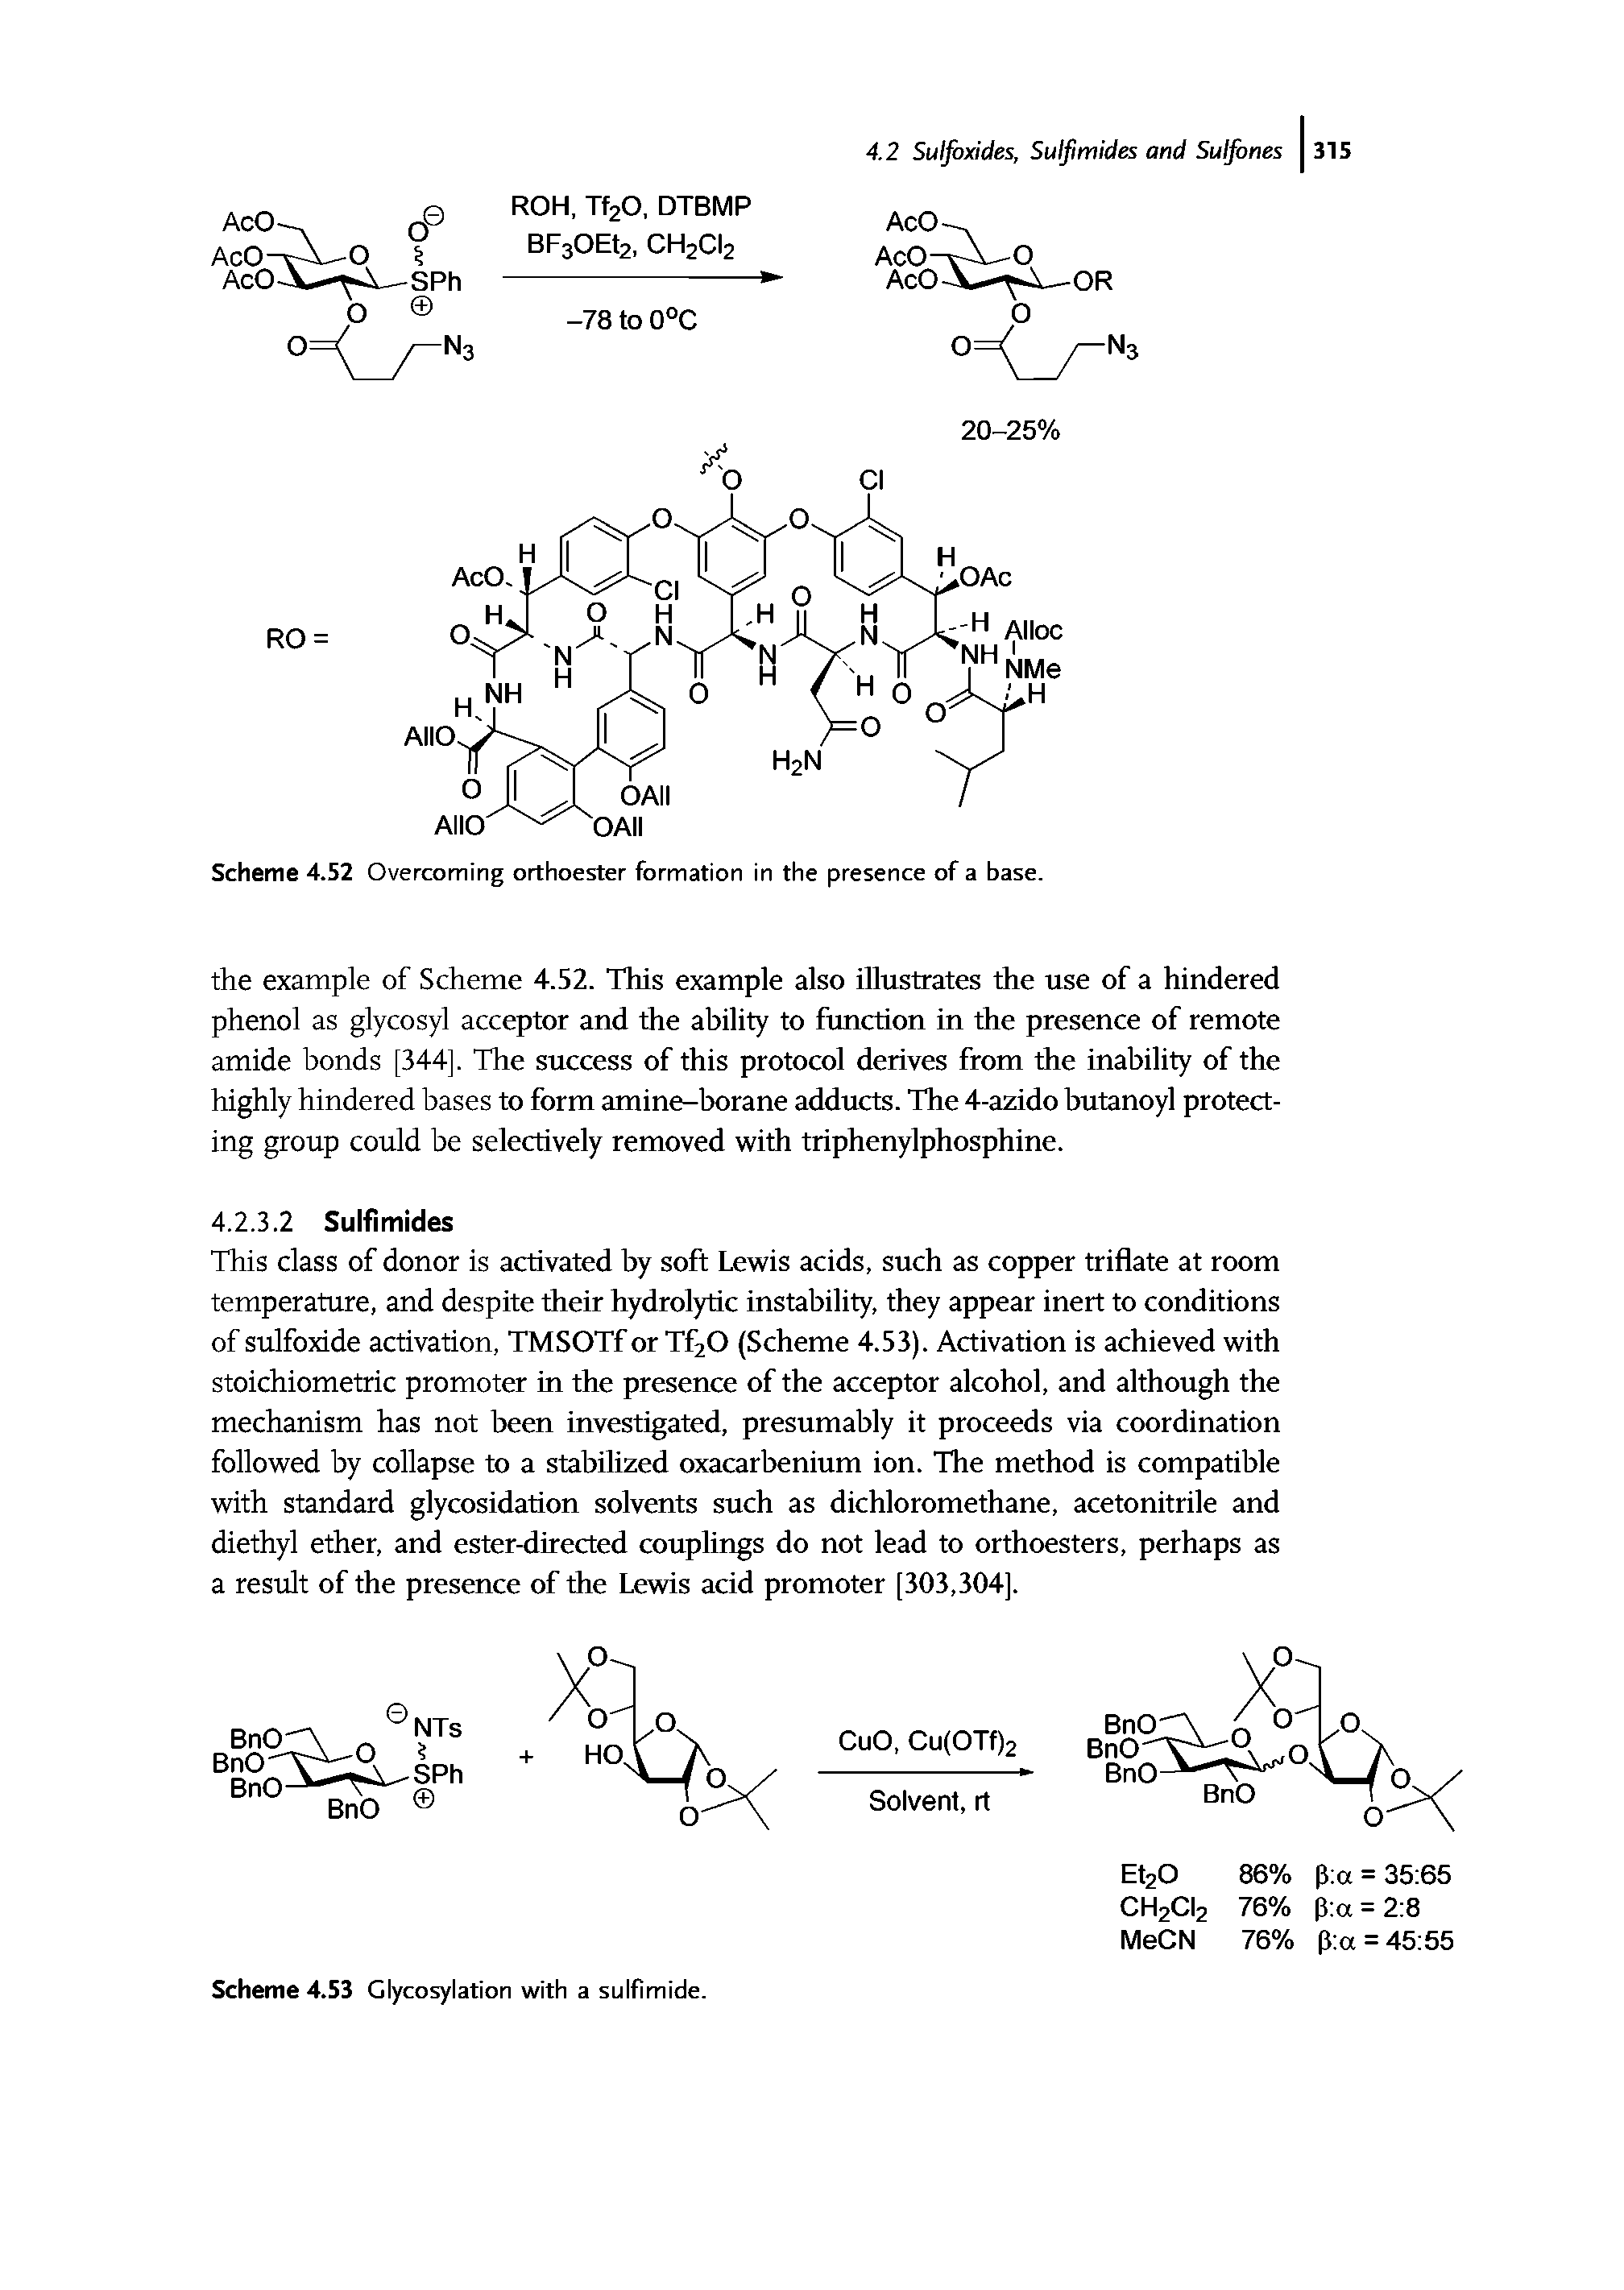 Scheme 4.52 Overcoming orthoester formation in the presence of a base.